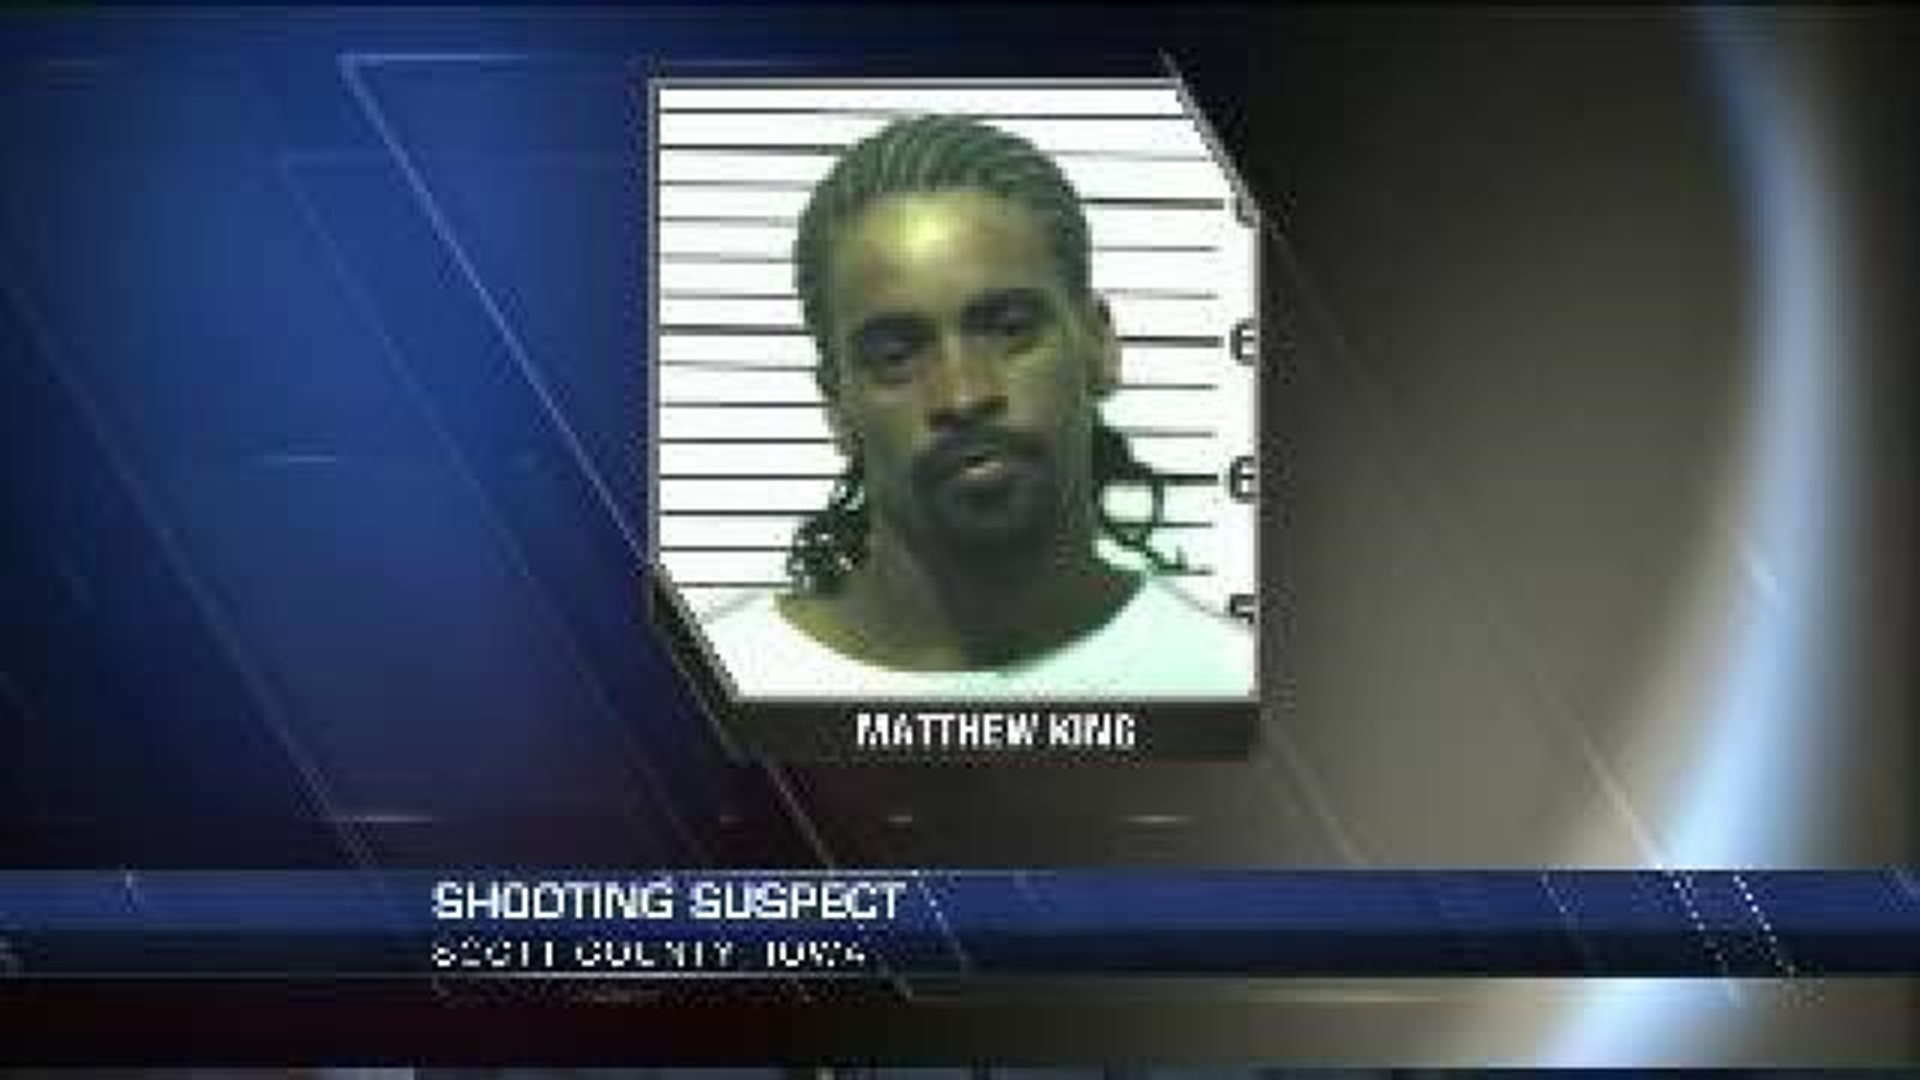 Police identify shooting suspect